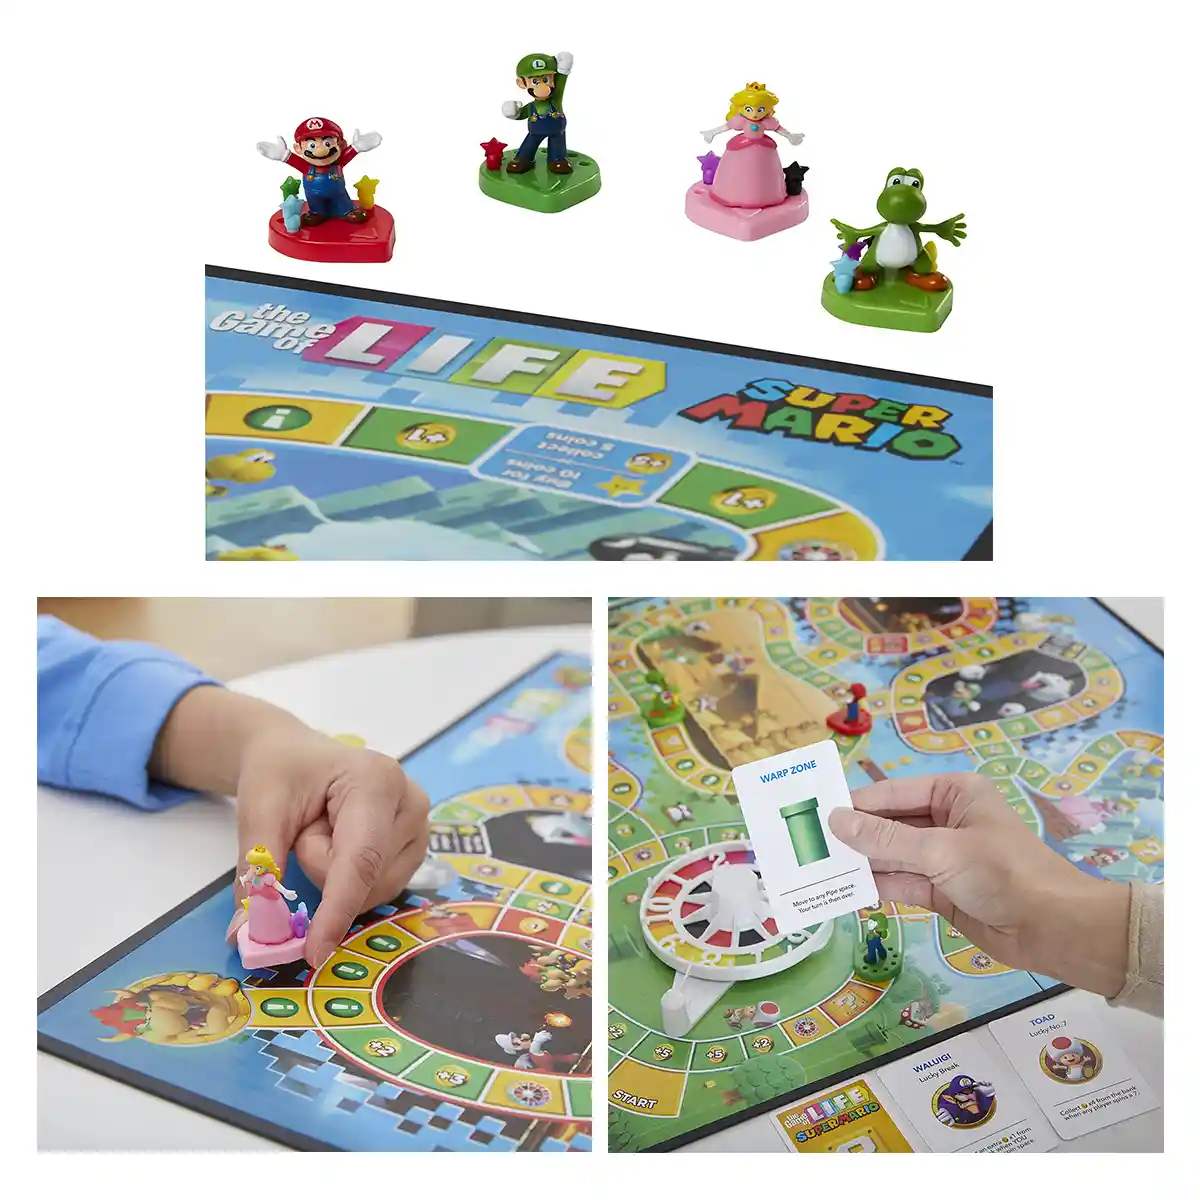  Hasbro Gaming The Game of Life: Super Mario Edition